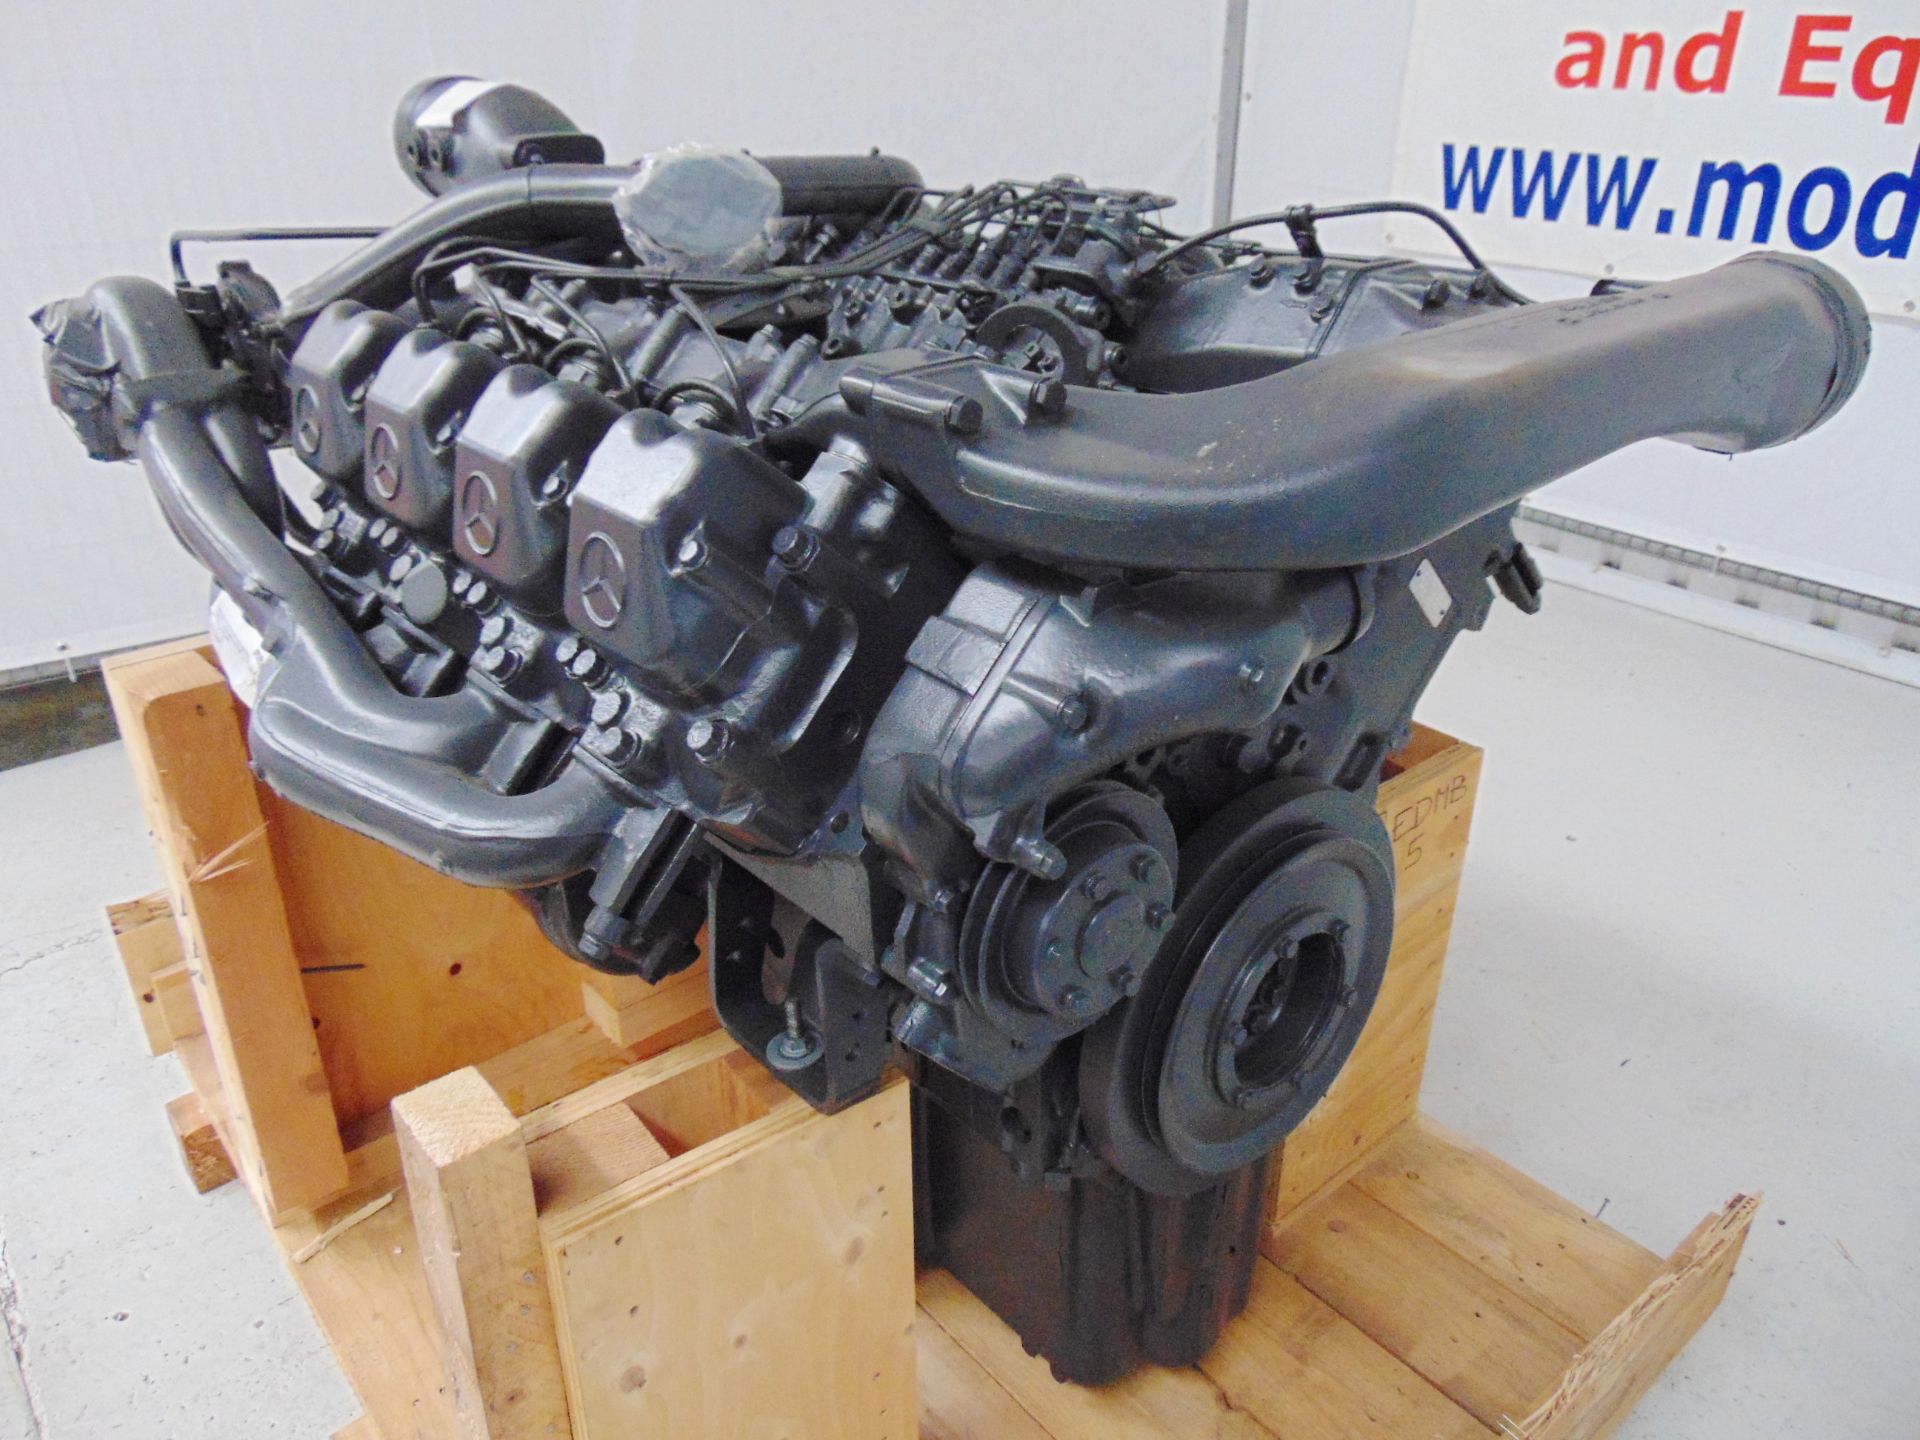 Factory Reconditioned Mercedes-Benz OM402LA V8 Twin Turbo Diesel Engine - Image 7 of 16